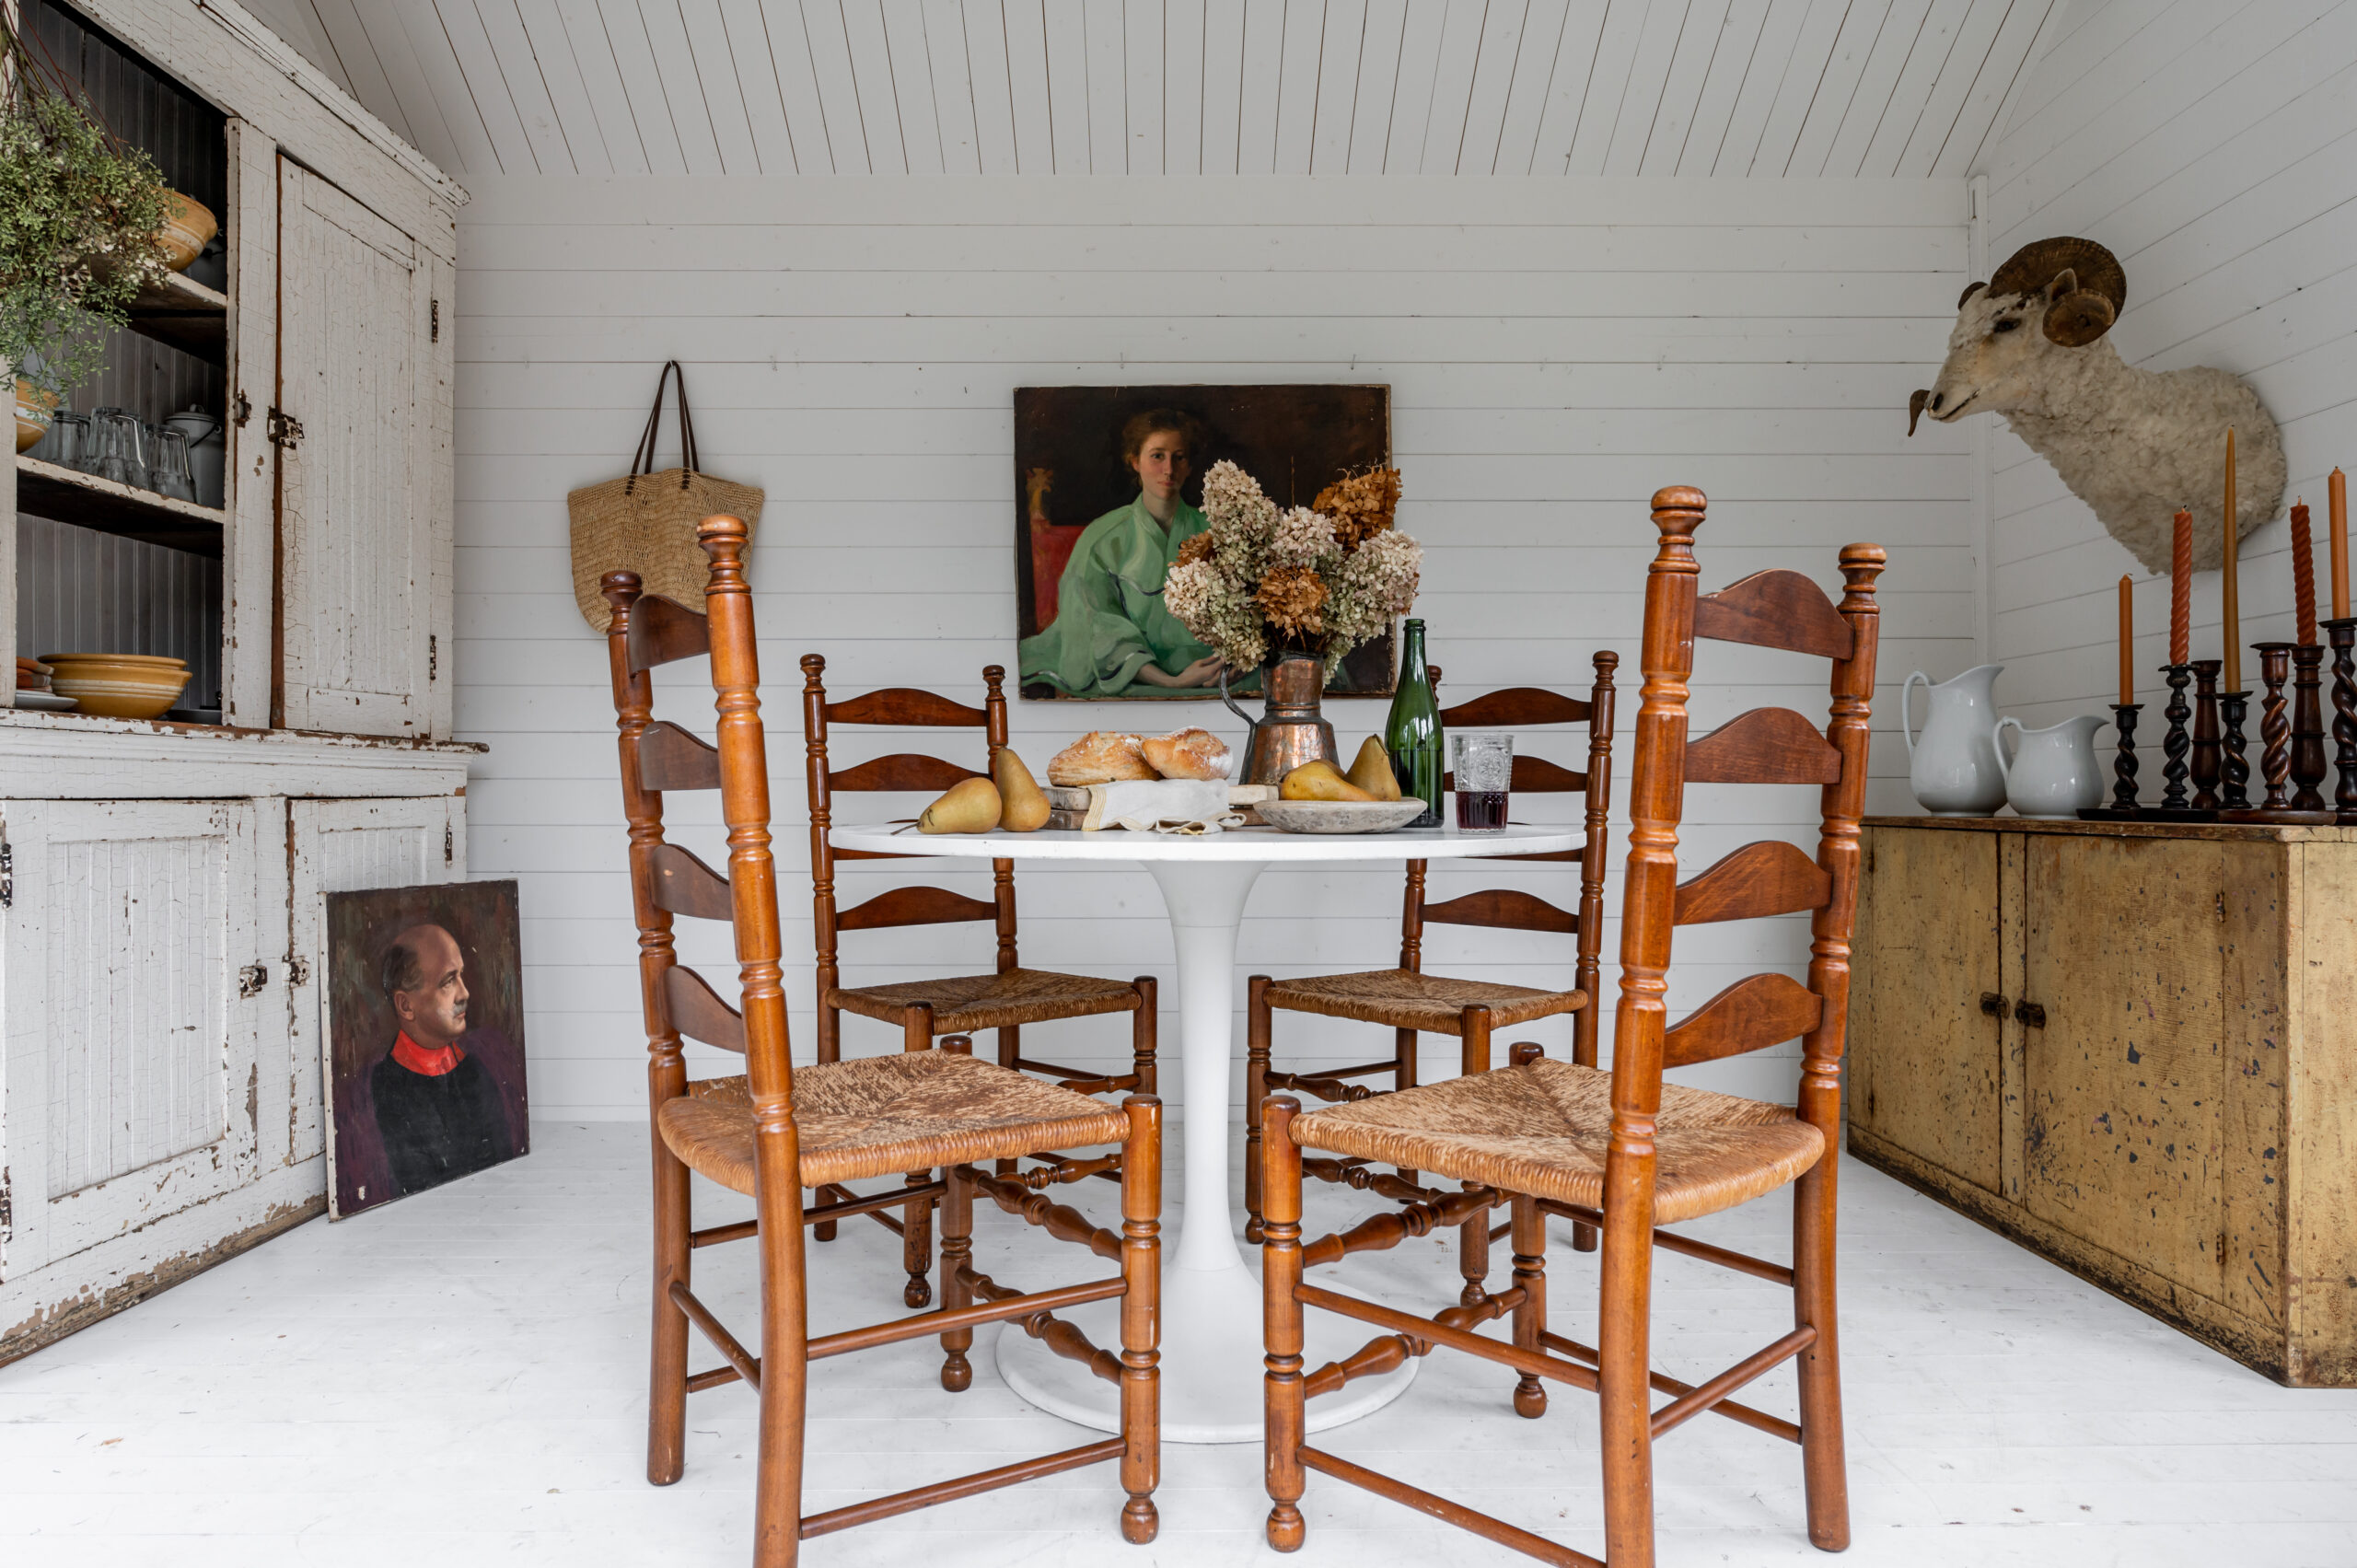 Antique wooden chairs and wall art in a dining room set up